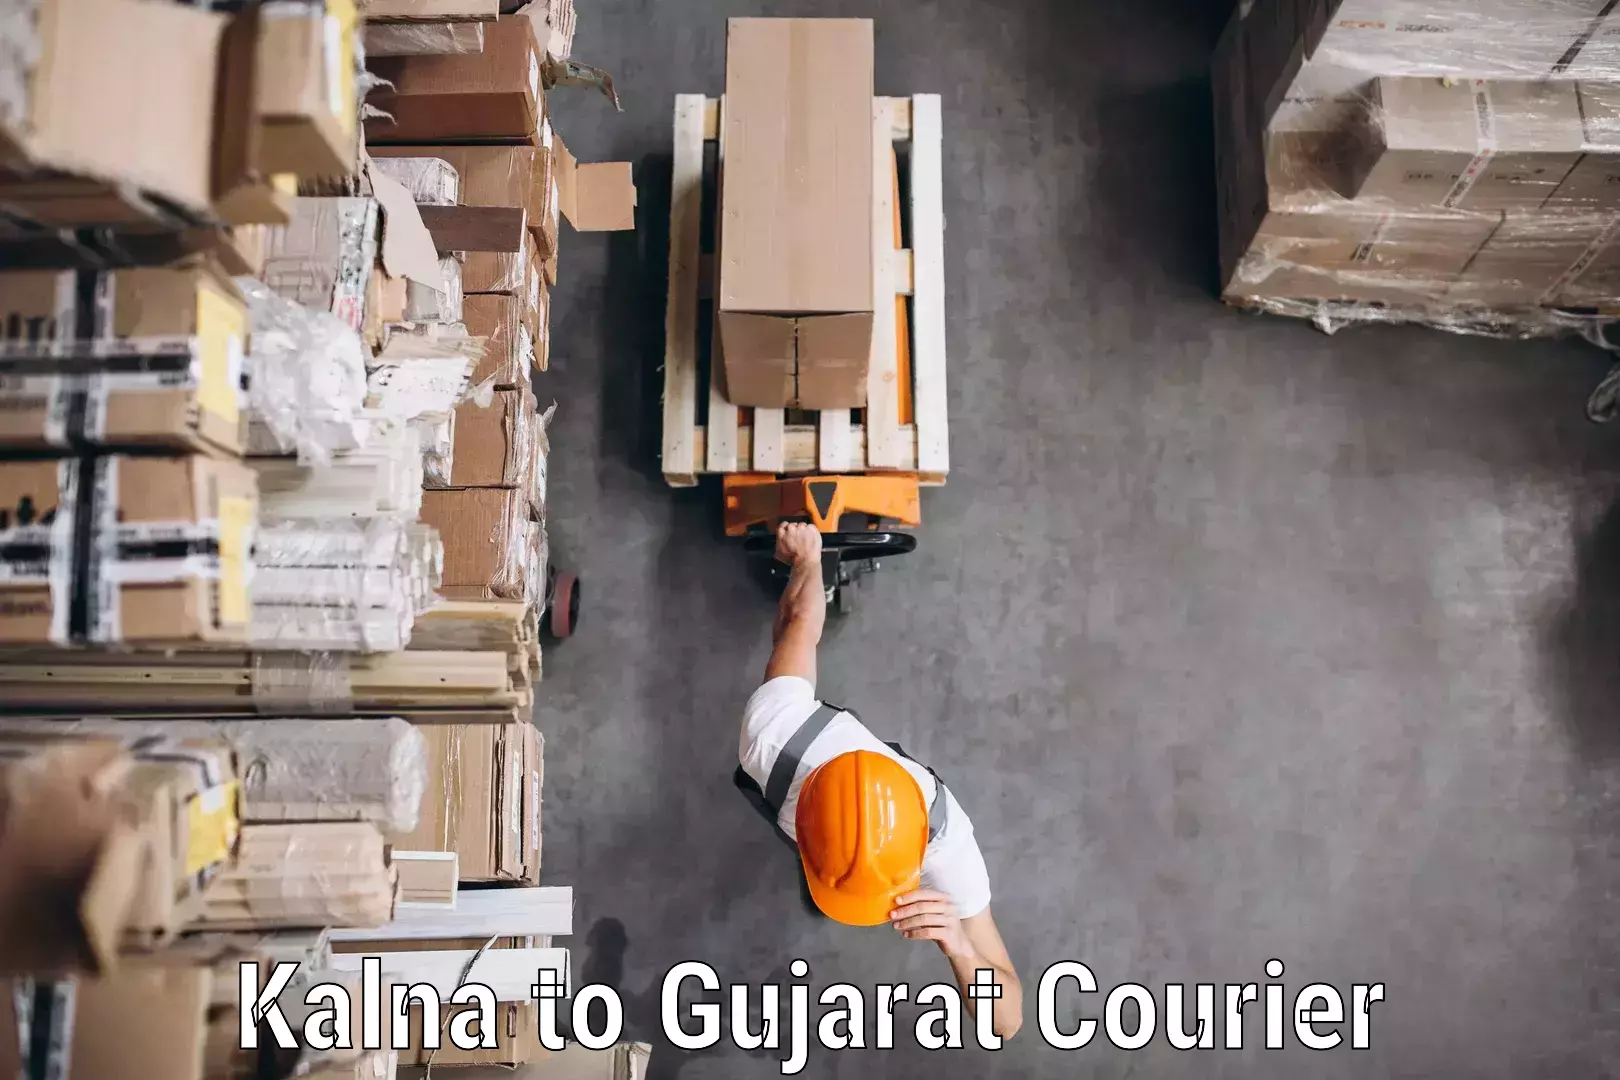 Reliable courier service Kalna to Gujarat